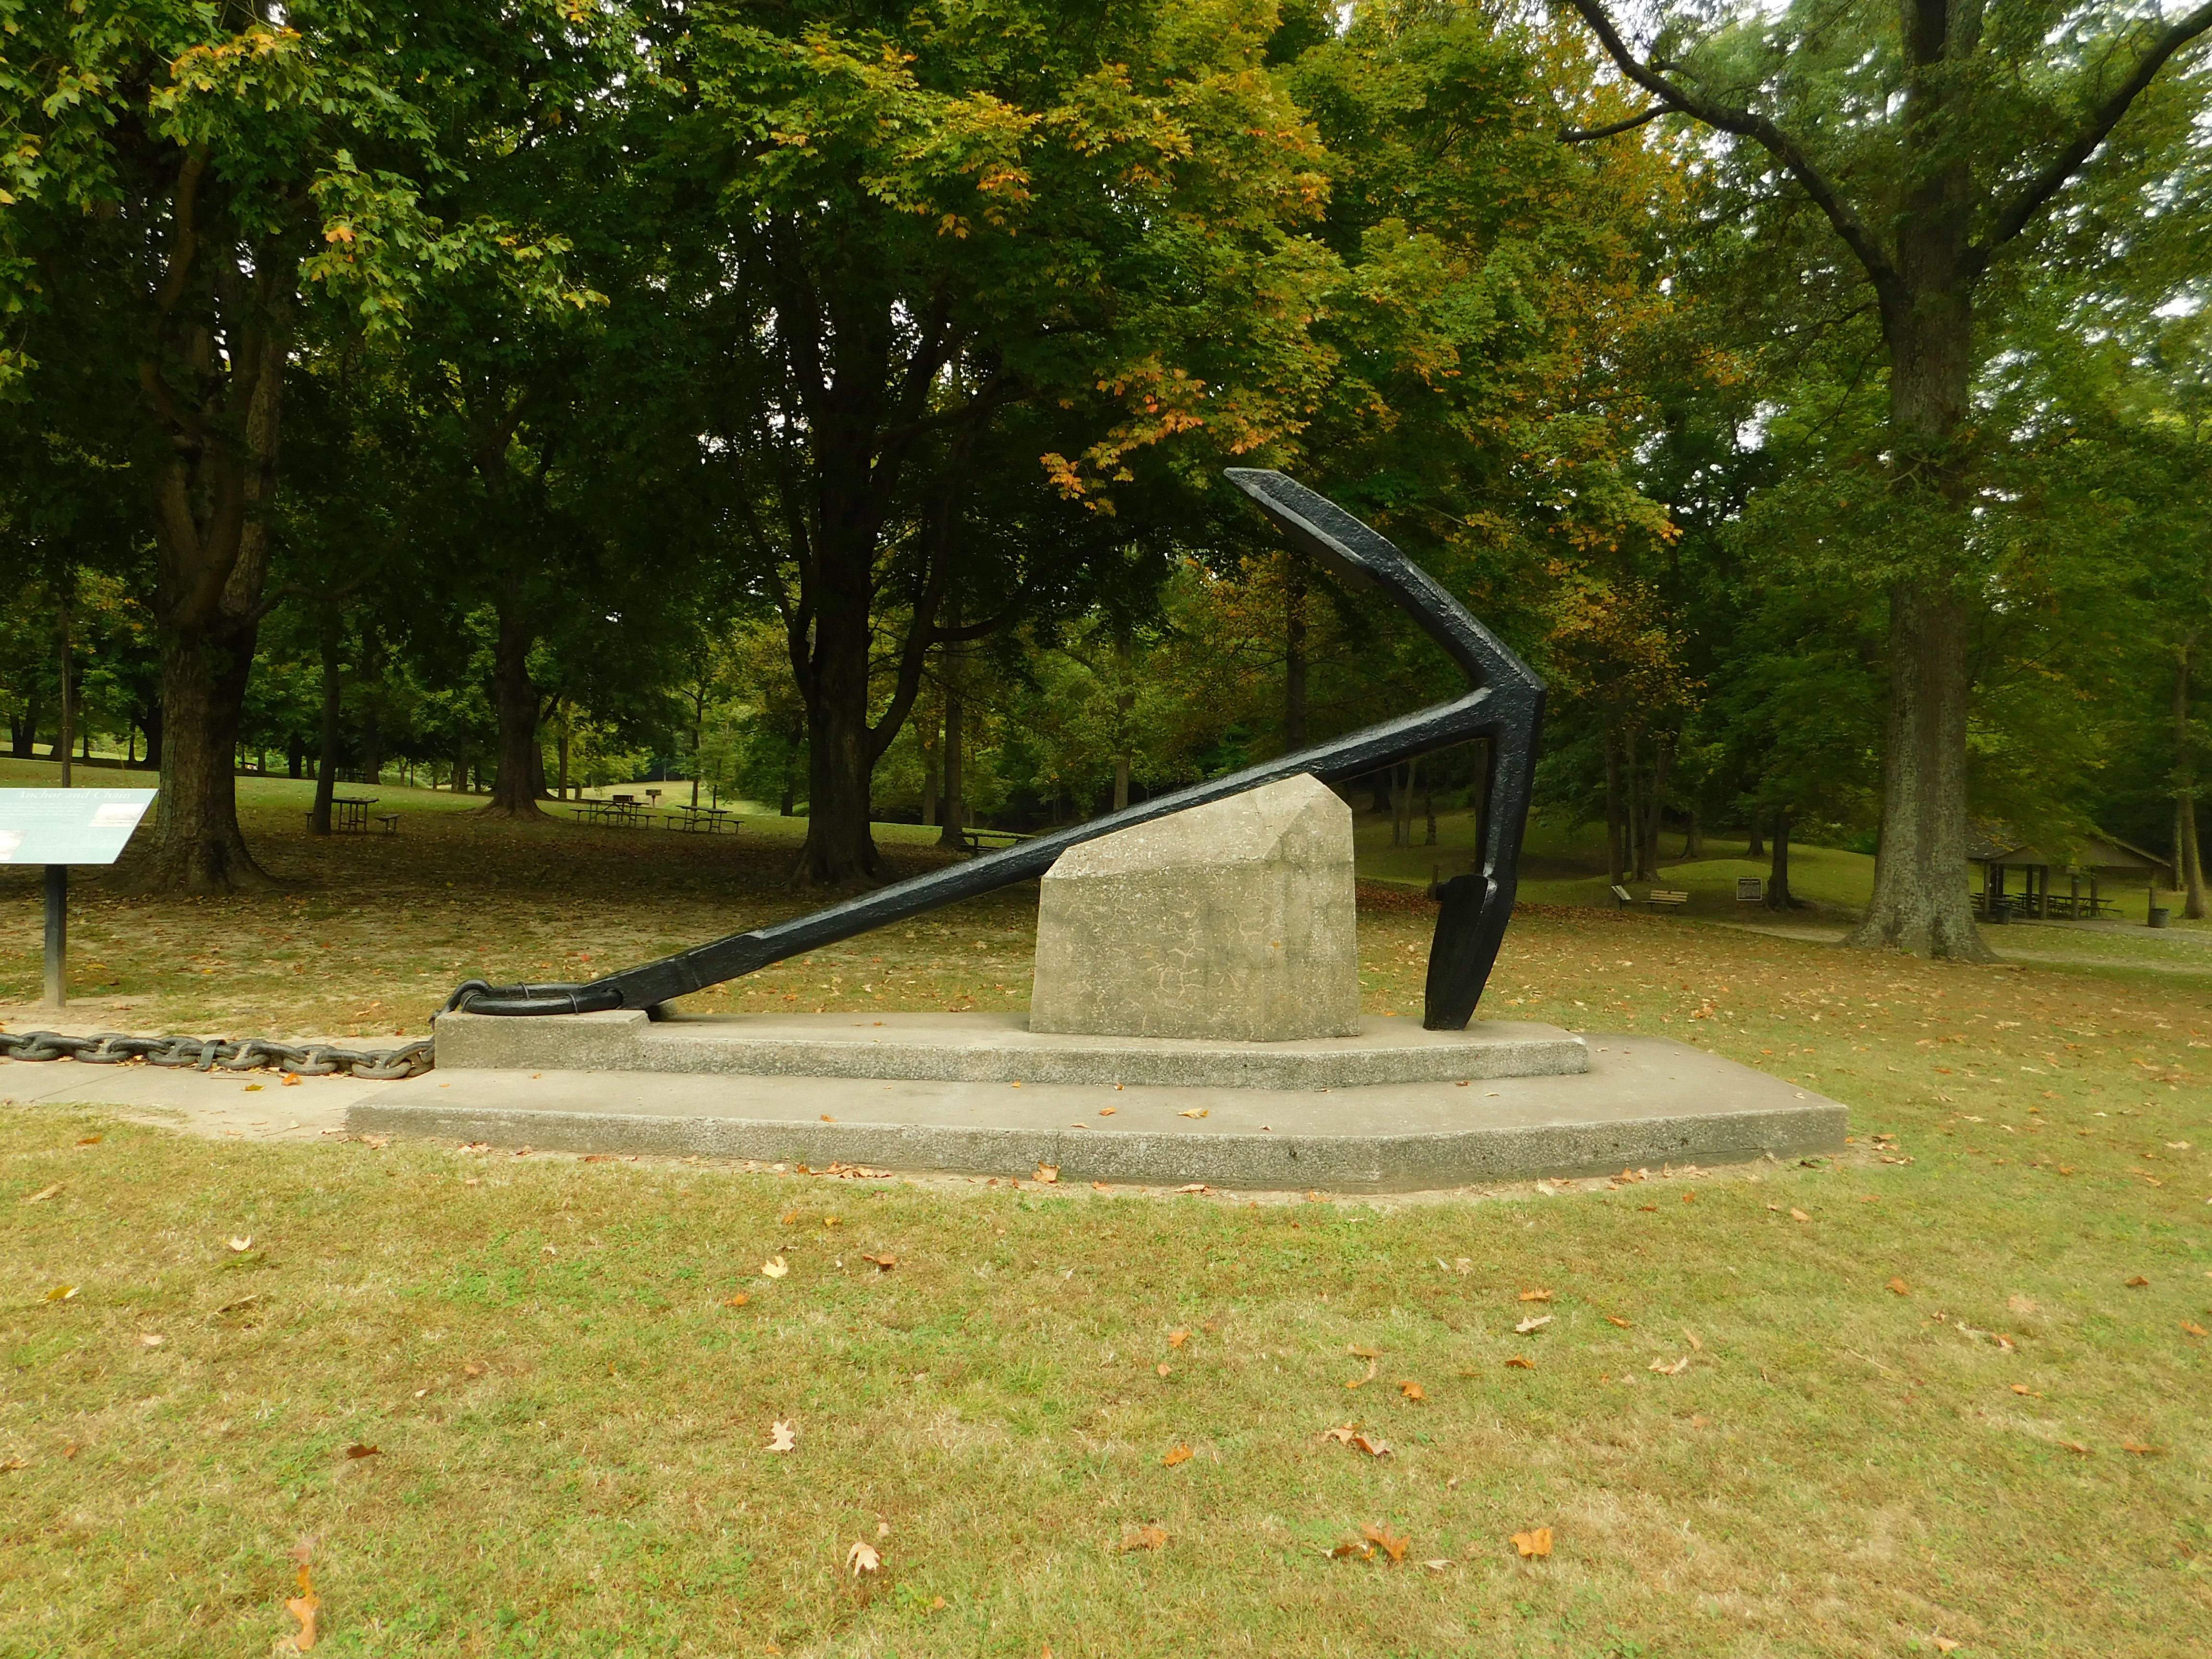 The anchor and chain that was across the Mississippi river.